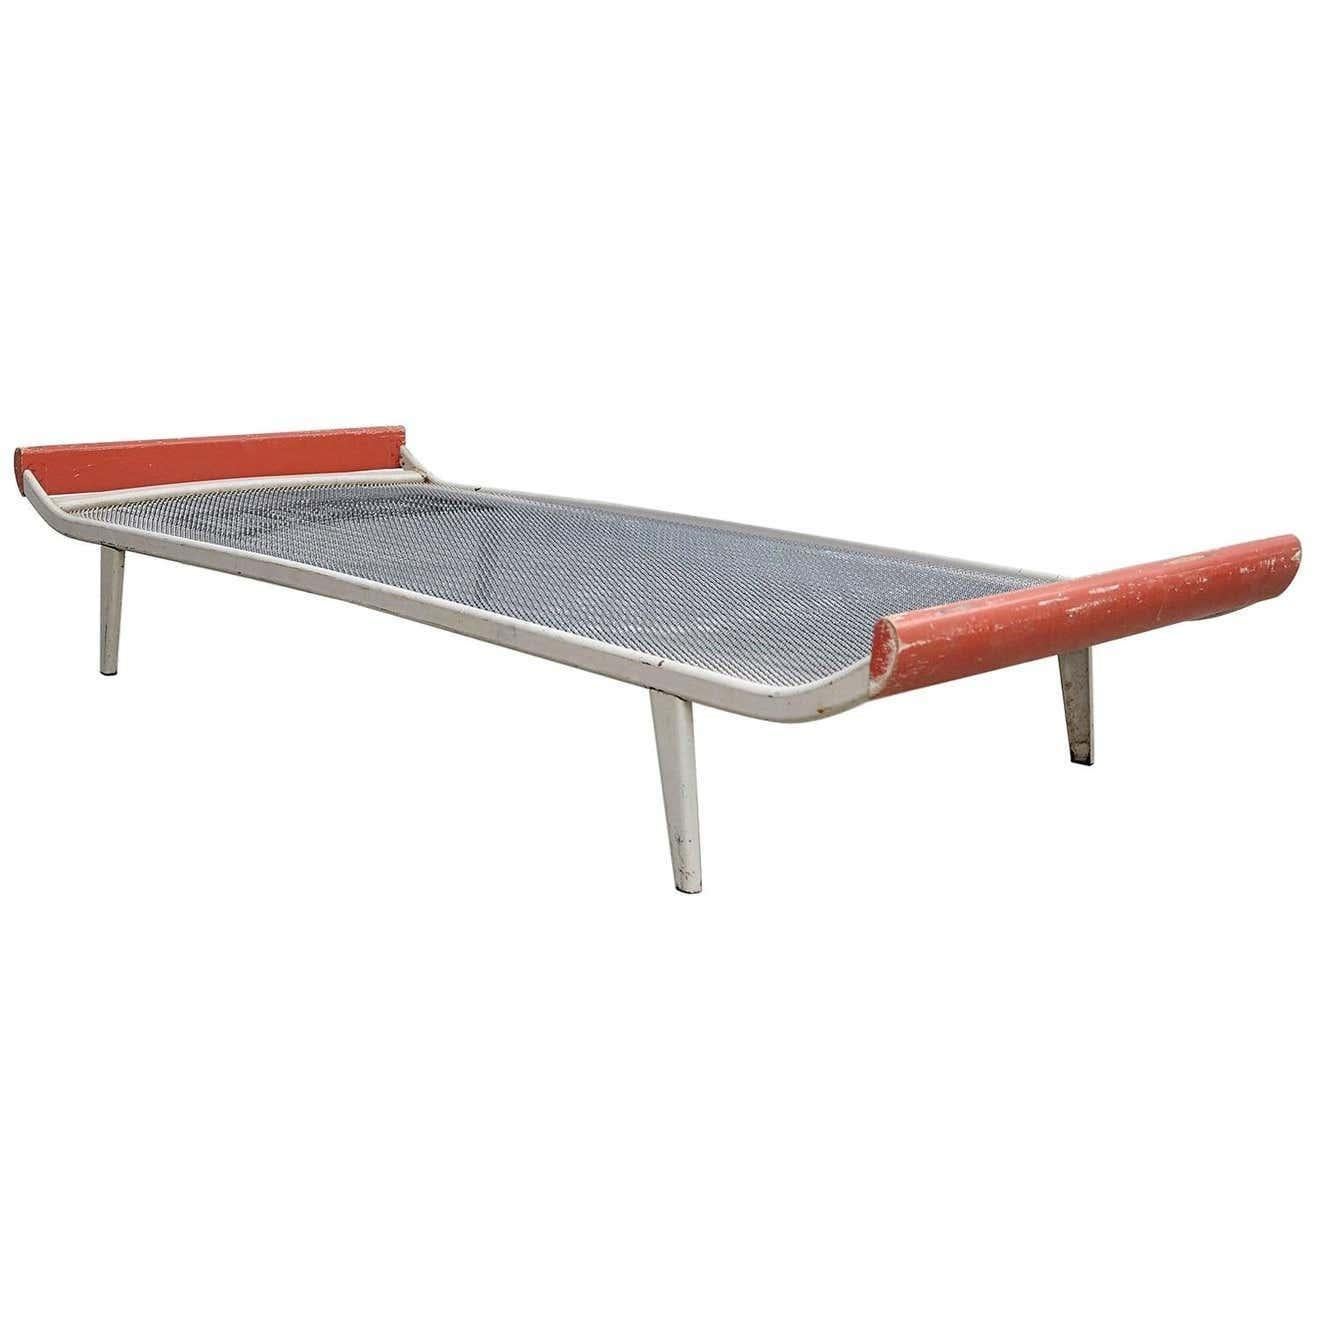 Dick Cordemeijer Mid-Century Modern Metal and Wood Daybed Cleopatra, circa 1950 For Sale 10